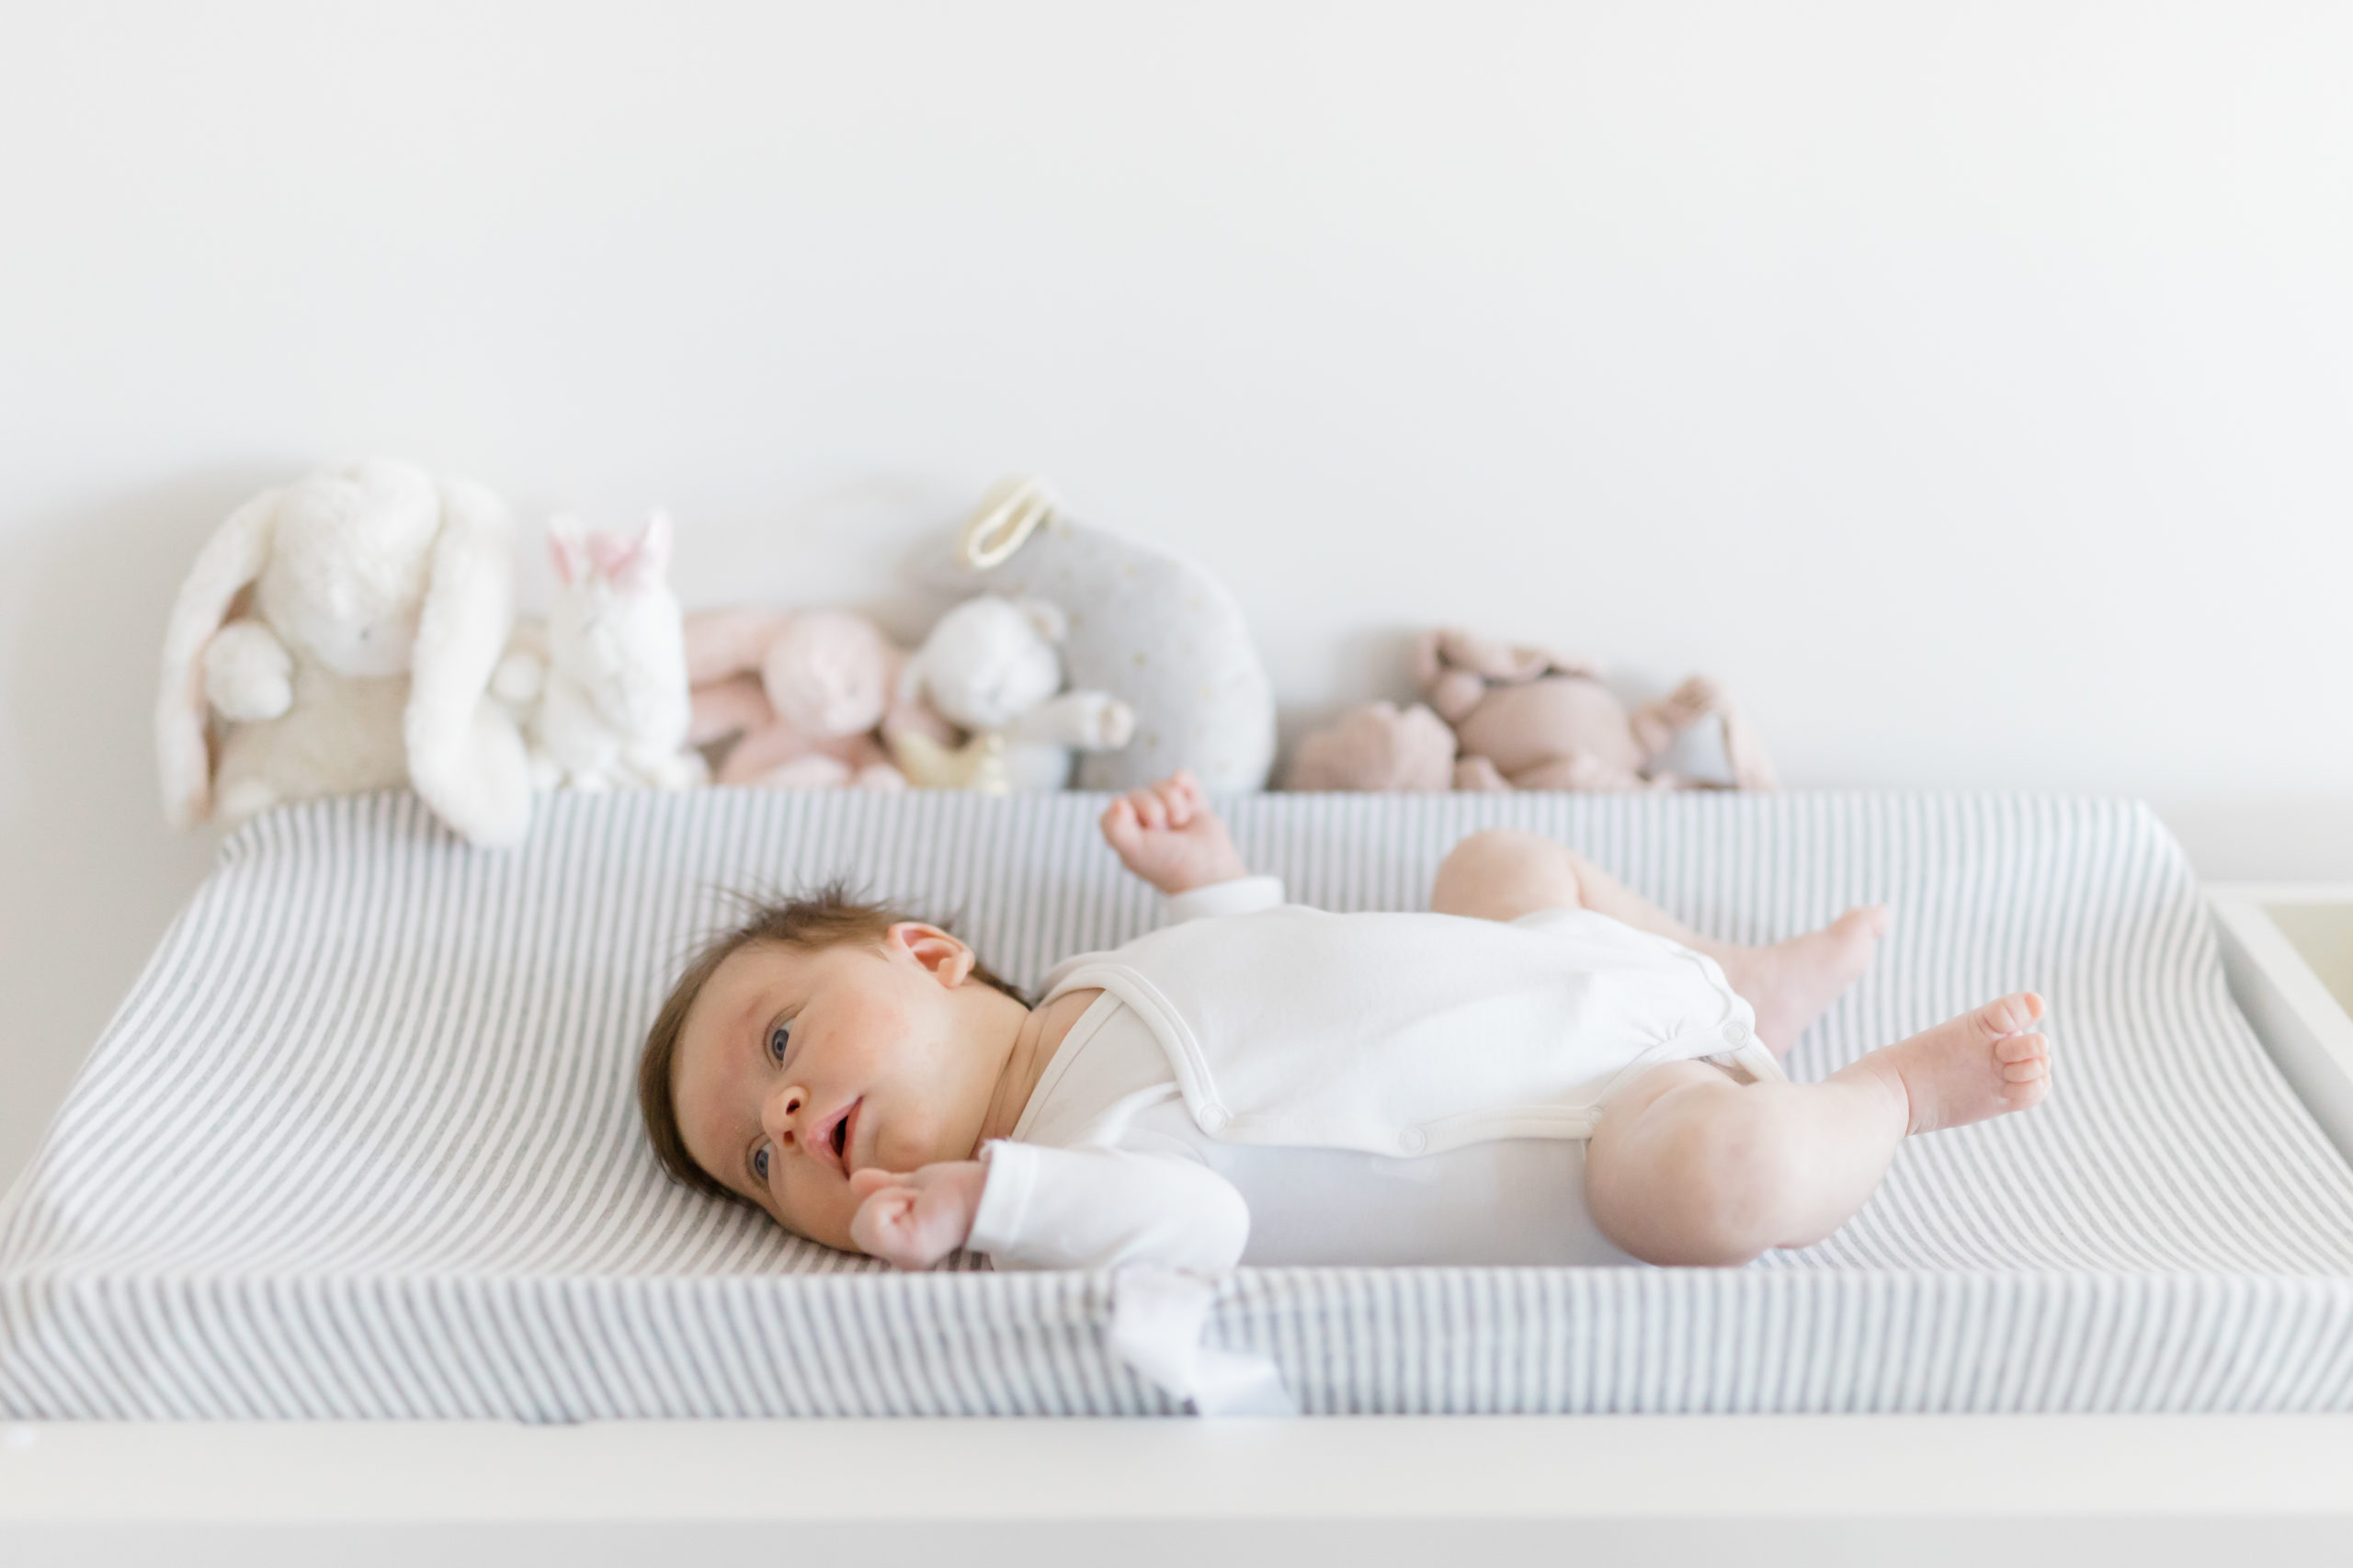 A baby on her changing table at an in home newborn photography session in NYC shot by Jacqueline Clair Photography